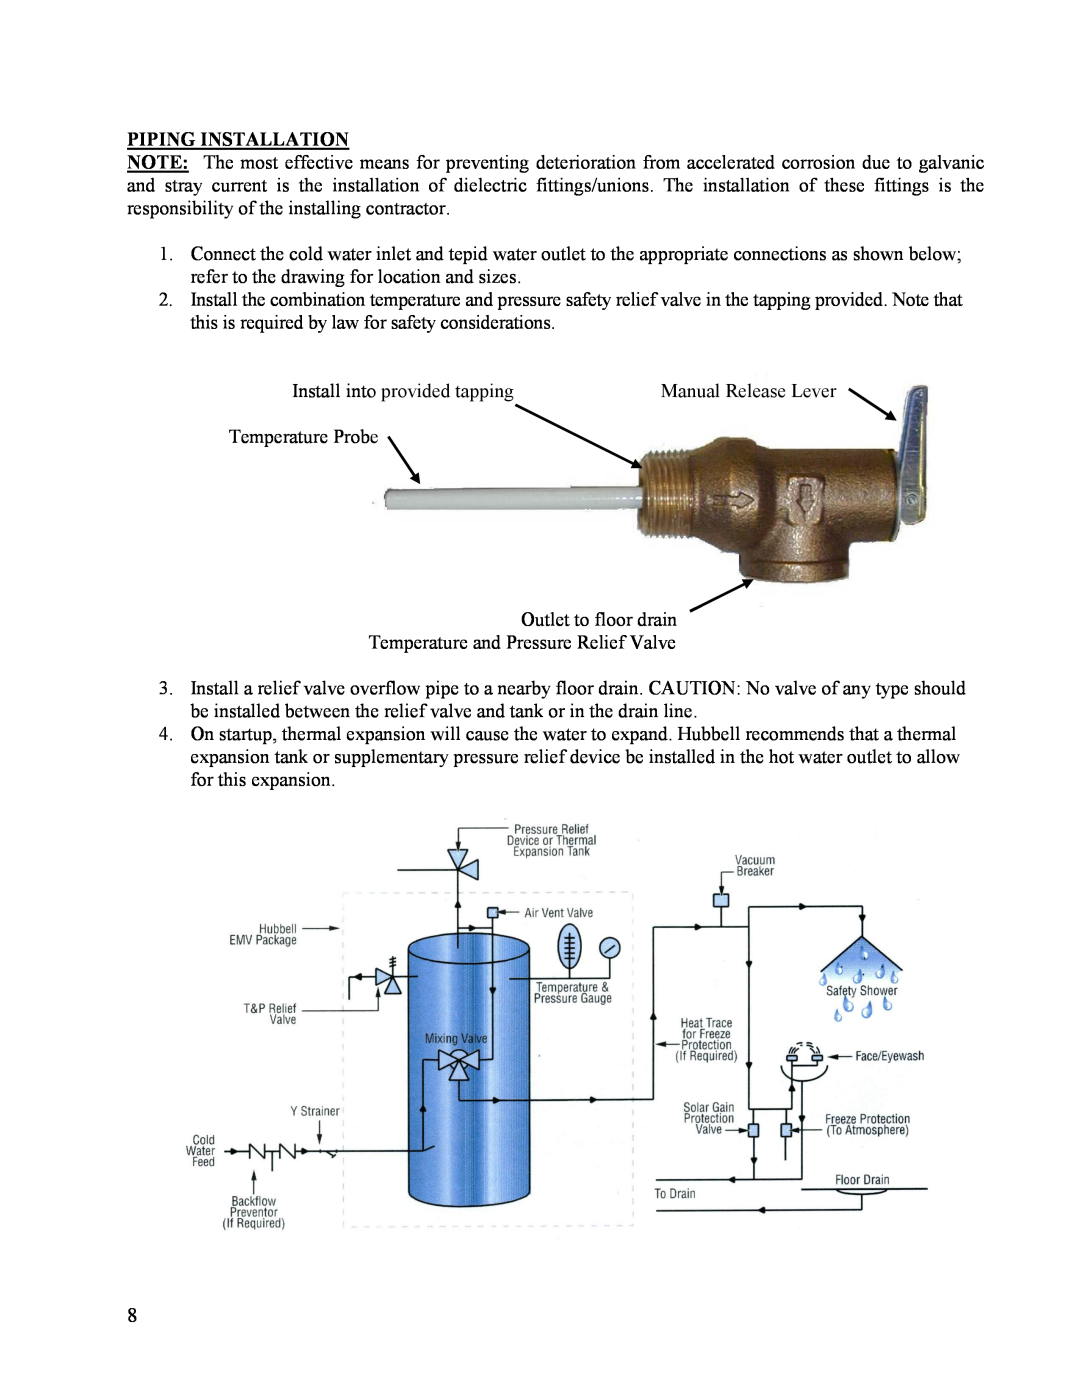 Hubbell Electric Heater Company EMV manual Piping Installation 